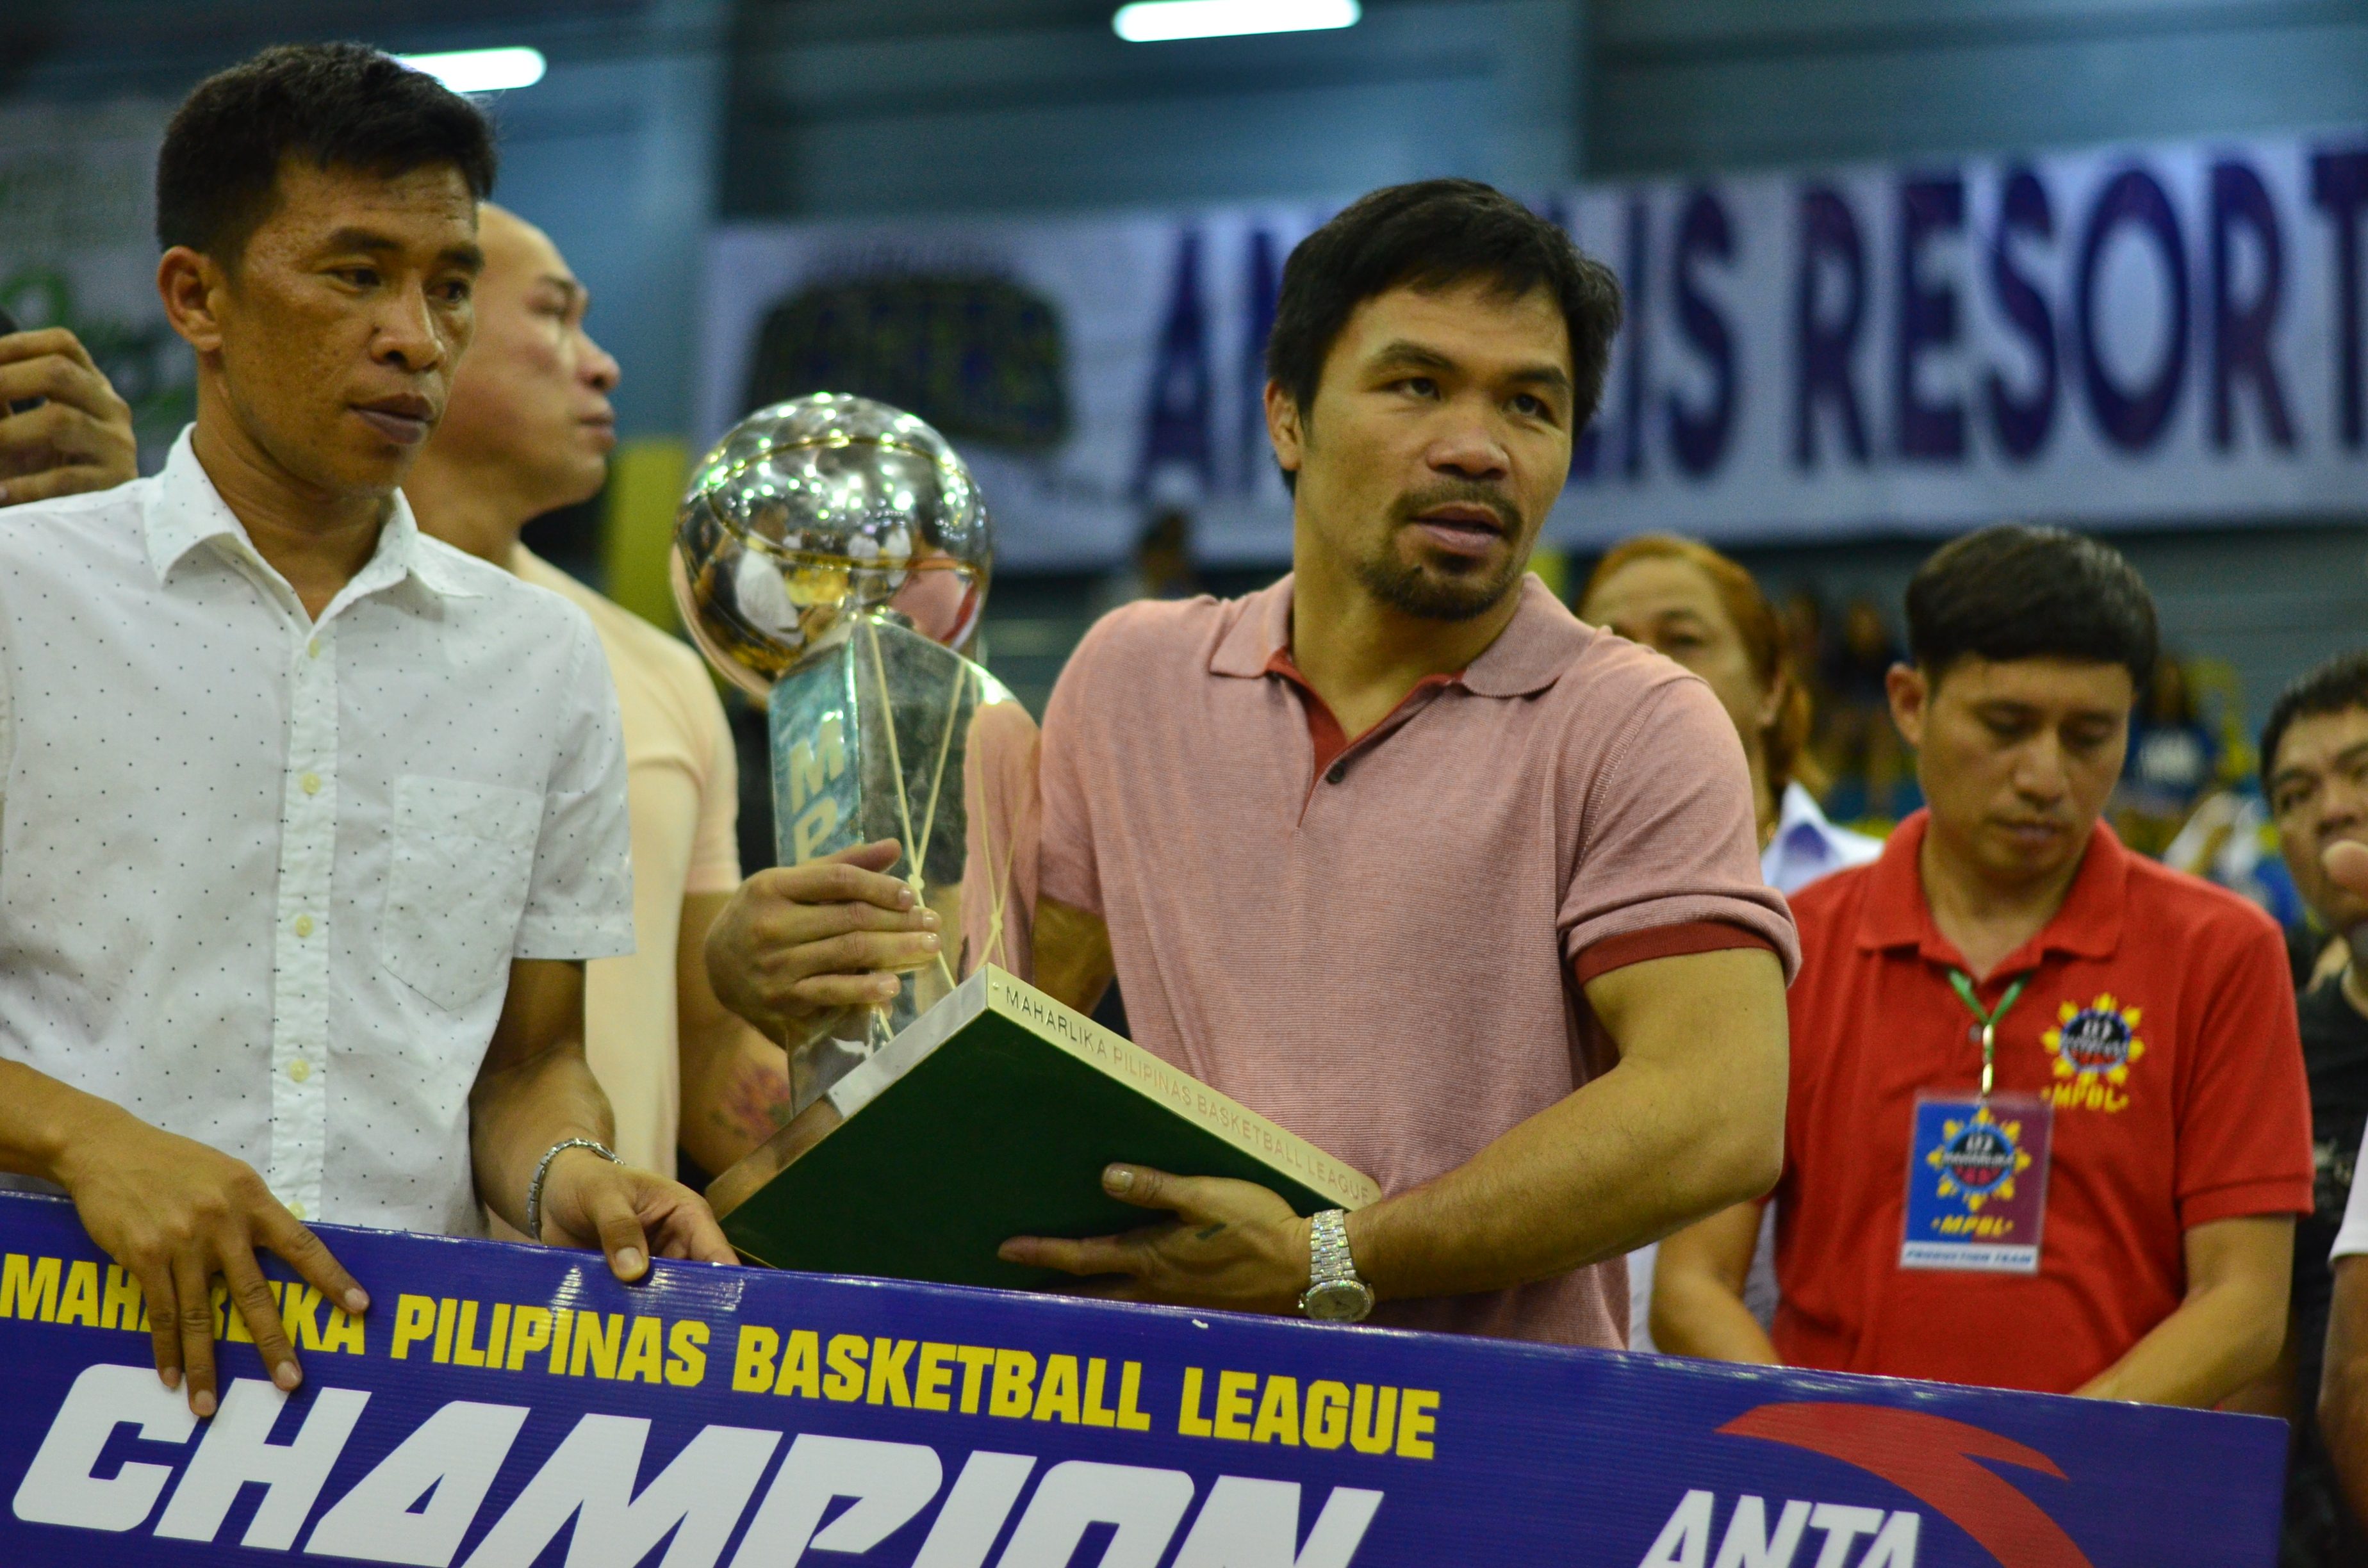 DOJ finds probable cause against 17 individuals in MPBL game-fixing scandal